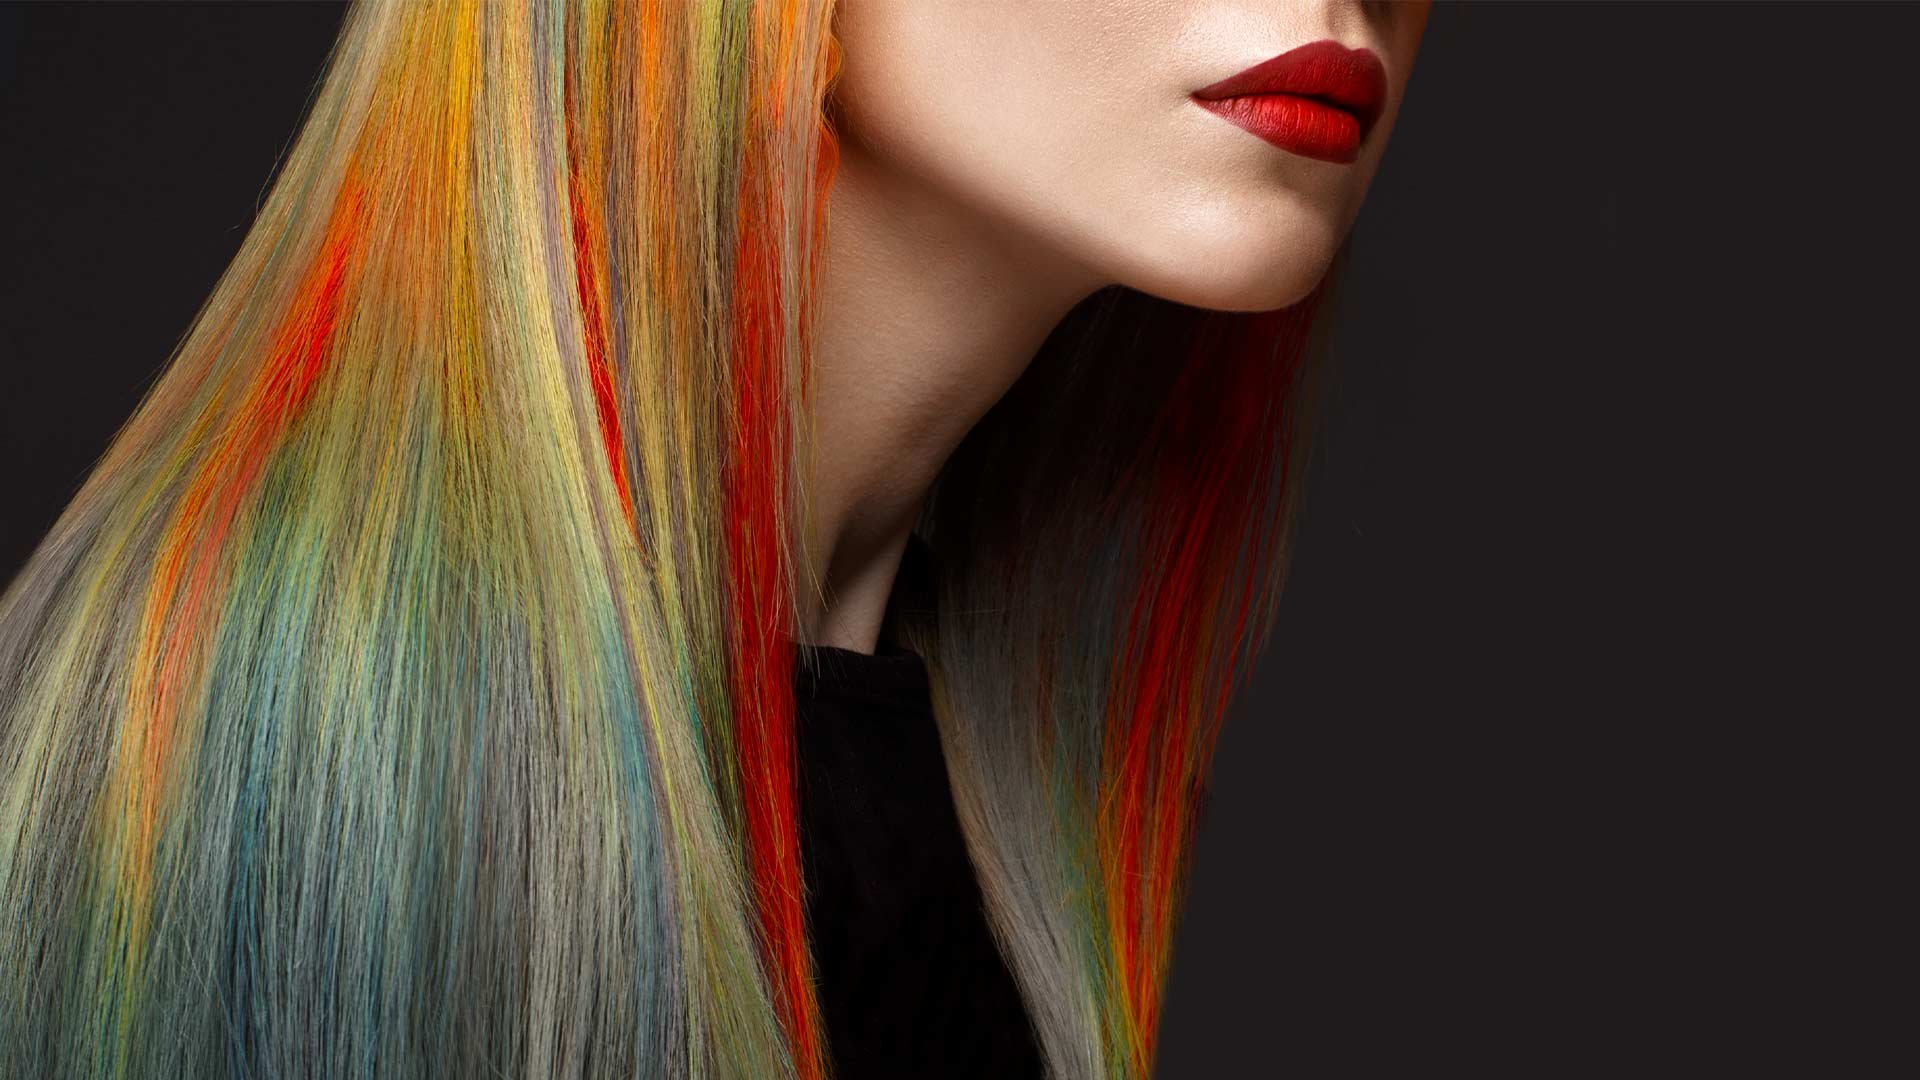 Loreal Paris Article How To Use Hair Chalk For Colorful Strands D